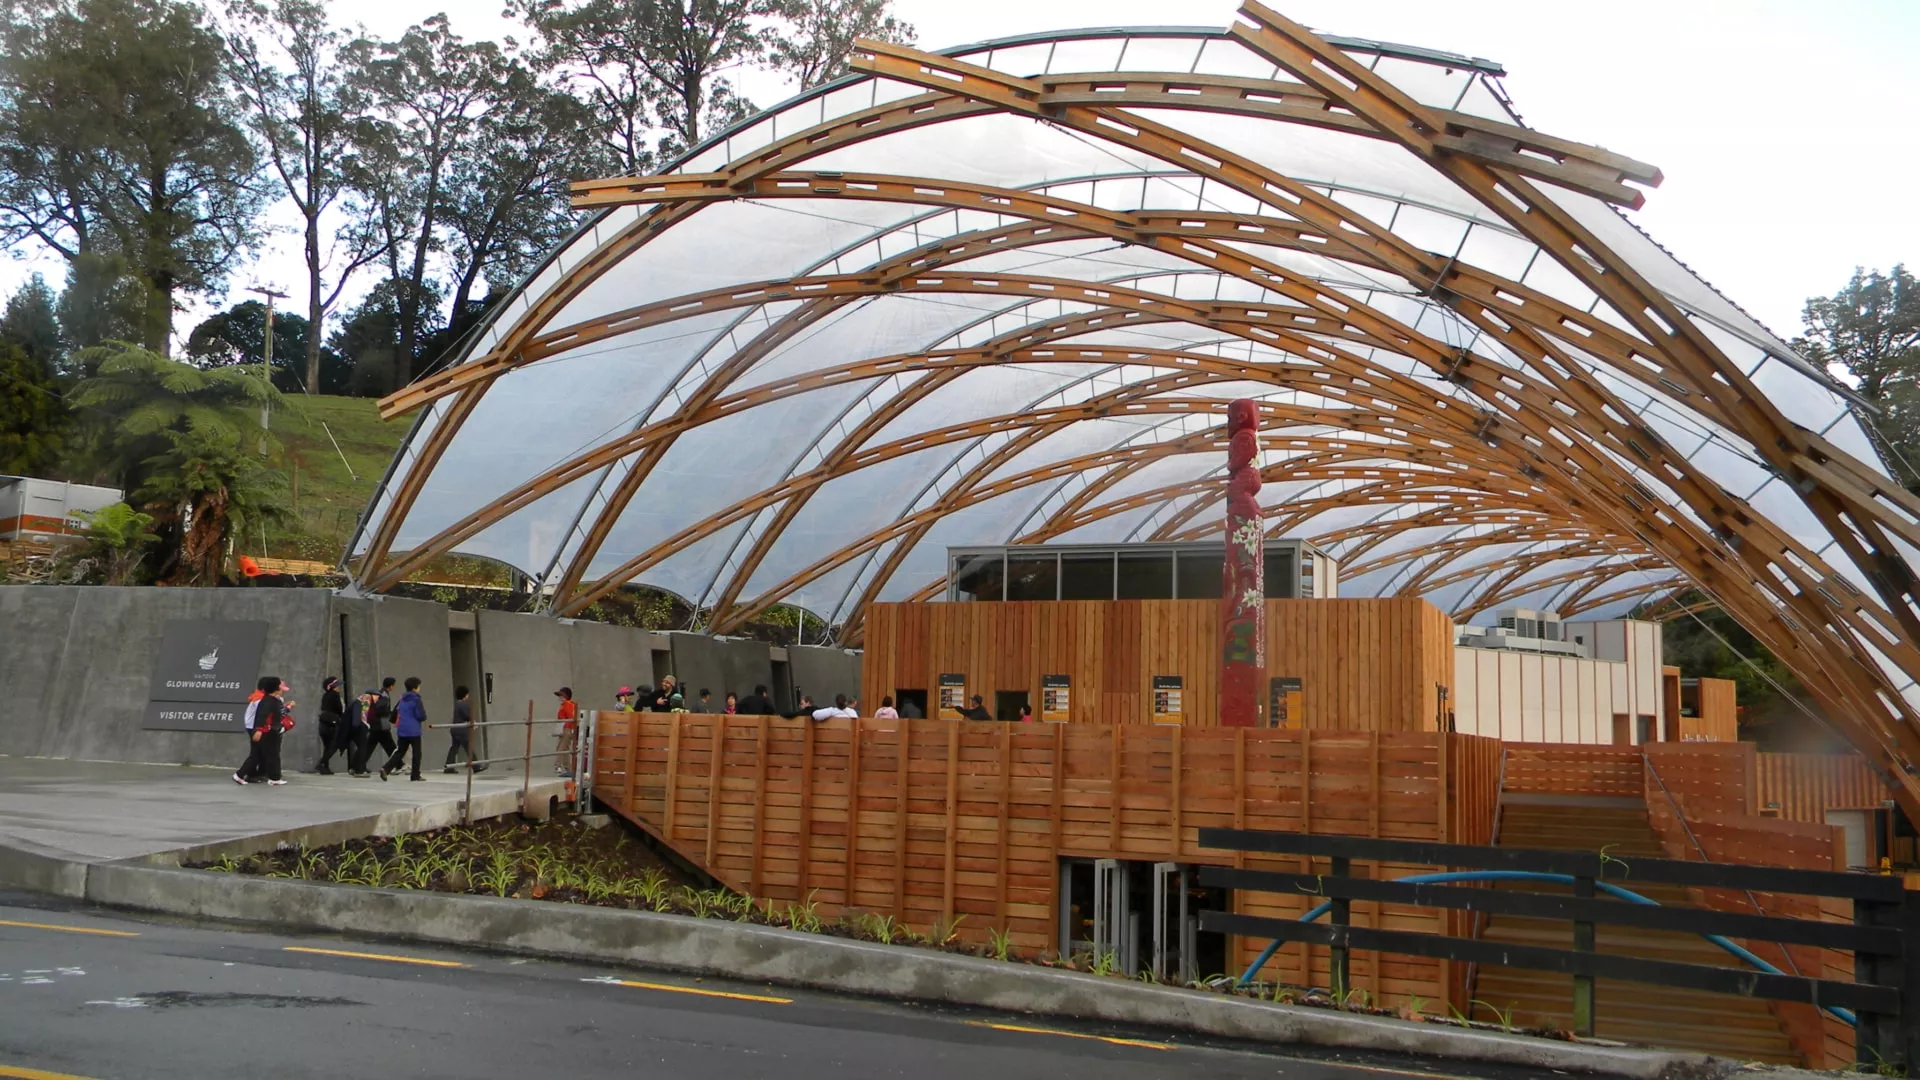 The design of the new Waitomo Glowworm Caves Visitor Center was an opportunity to showcases how engineering, the environment and local culture can fuse together in harmony.